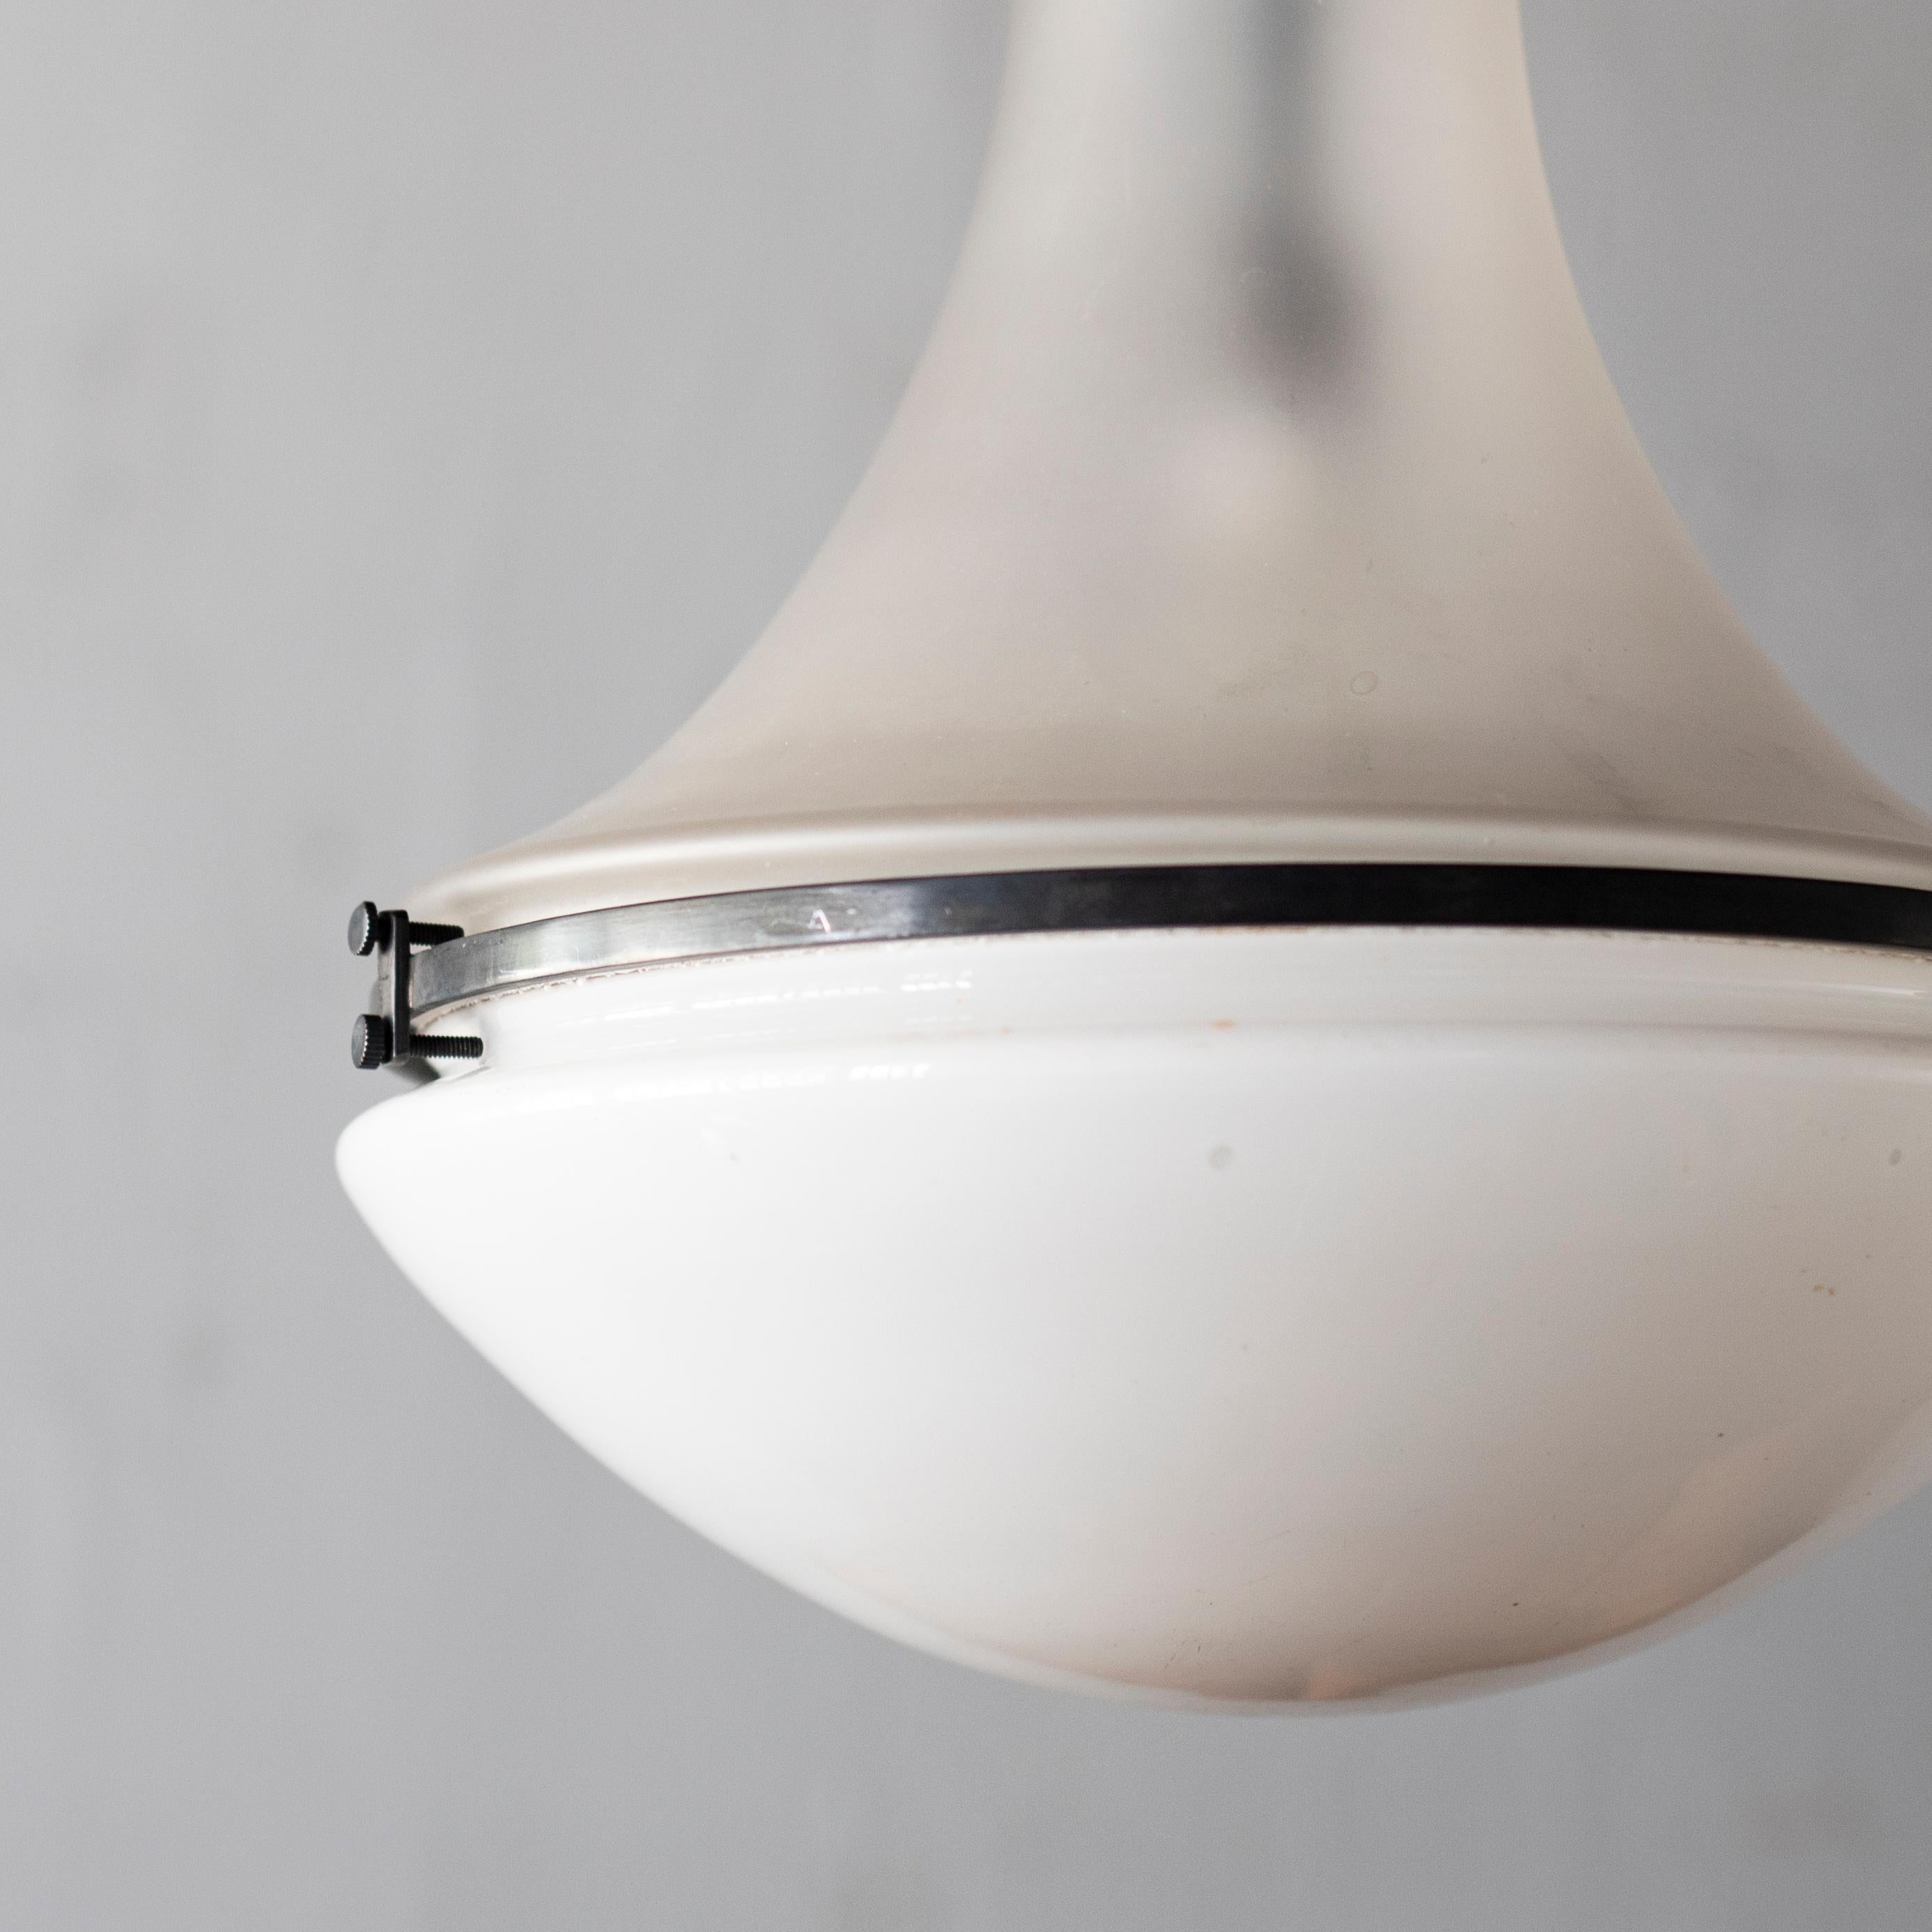 Luzette pendant lamp by Peter Behrens. 
This product was produced for Seamens and used in public buildings such as stations in the early 1900s. The top and bottom parts of milky glass and frosted glass are united with a metal rim and screws,